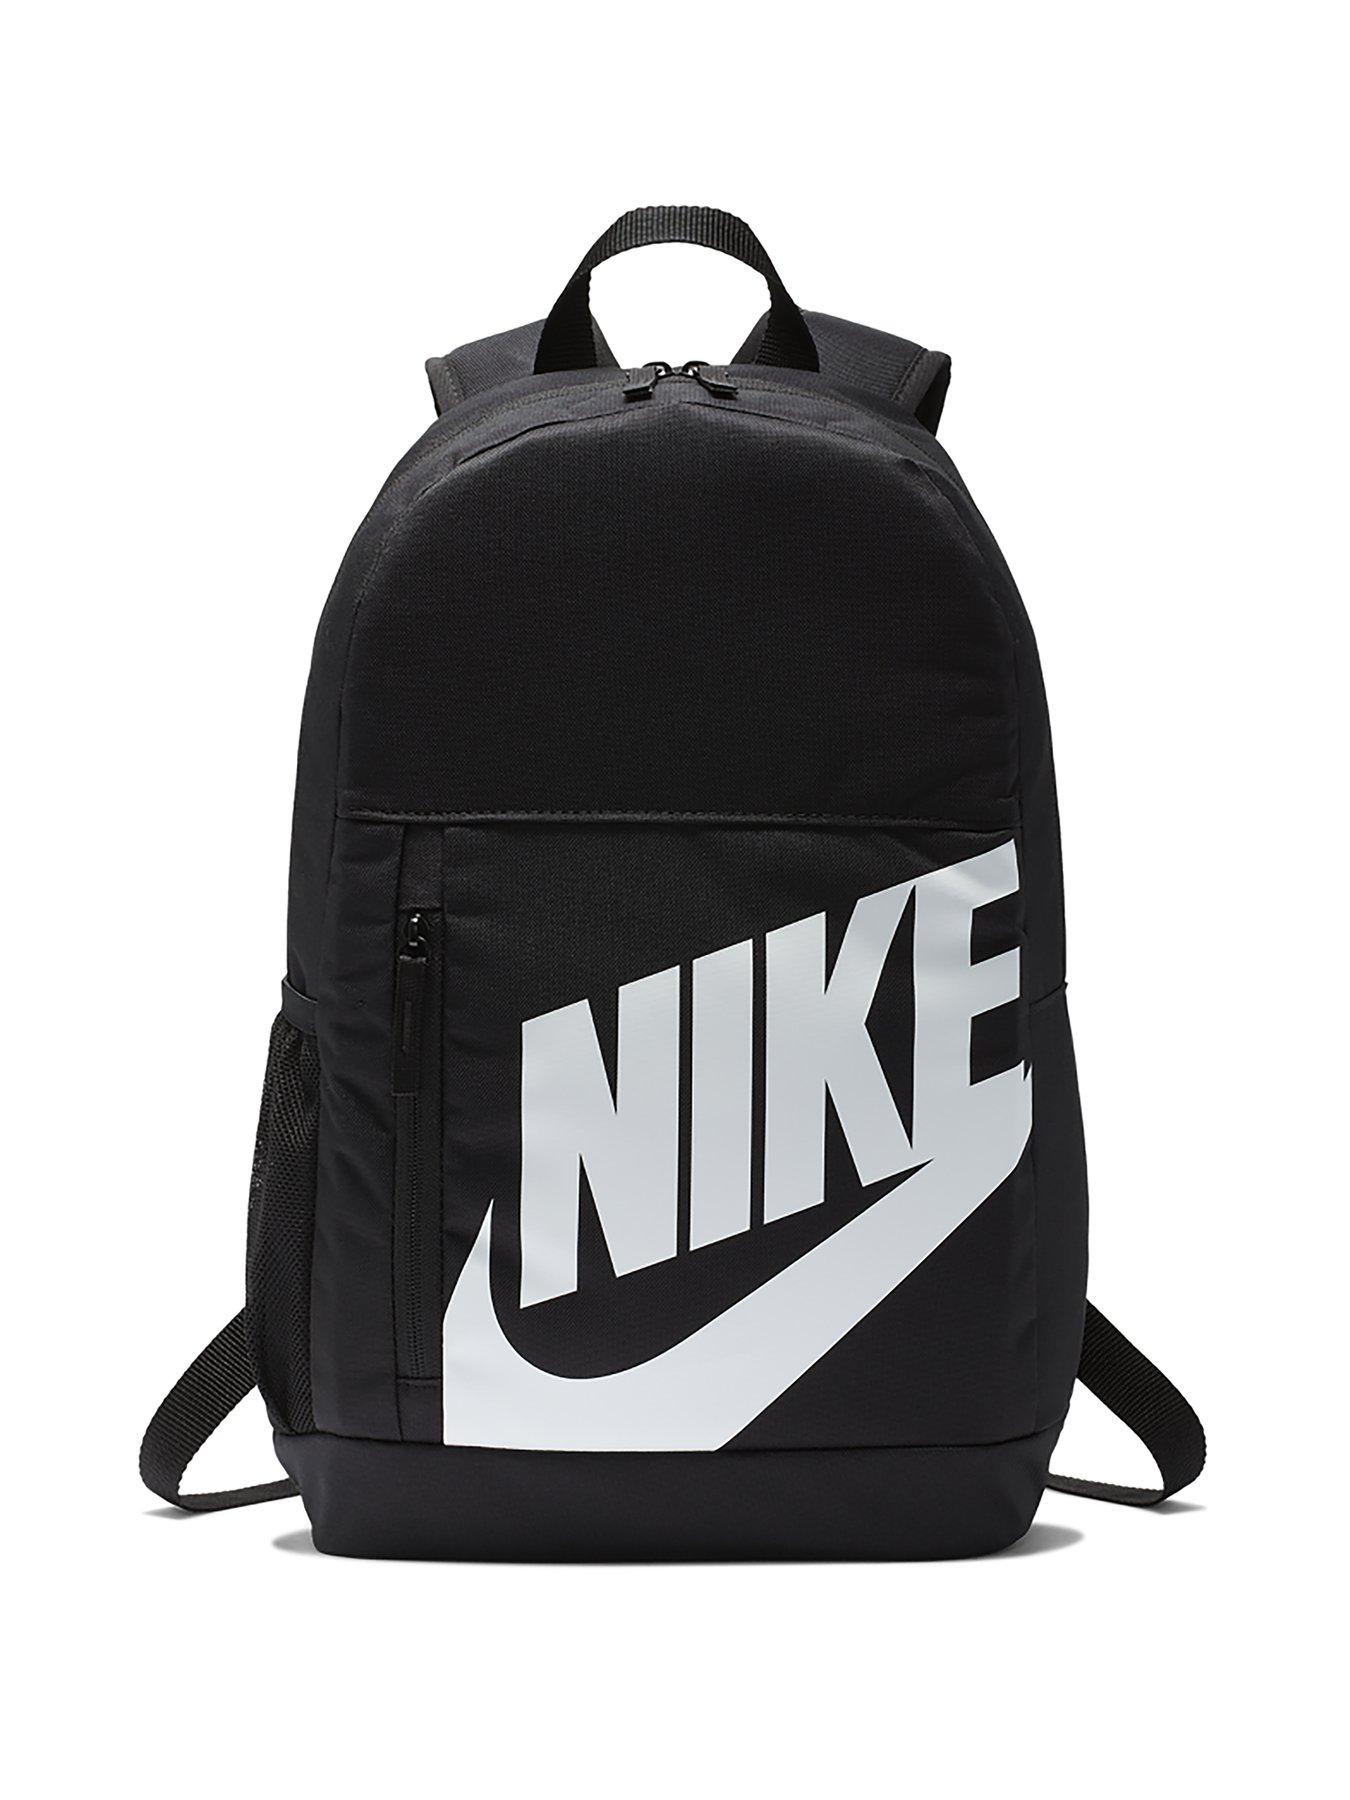 how much does a nike bookbag cost